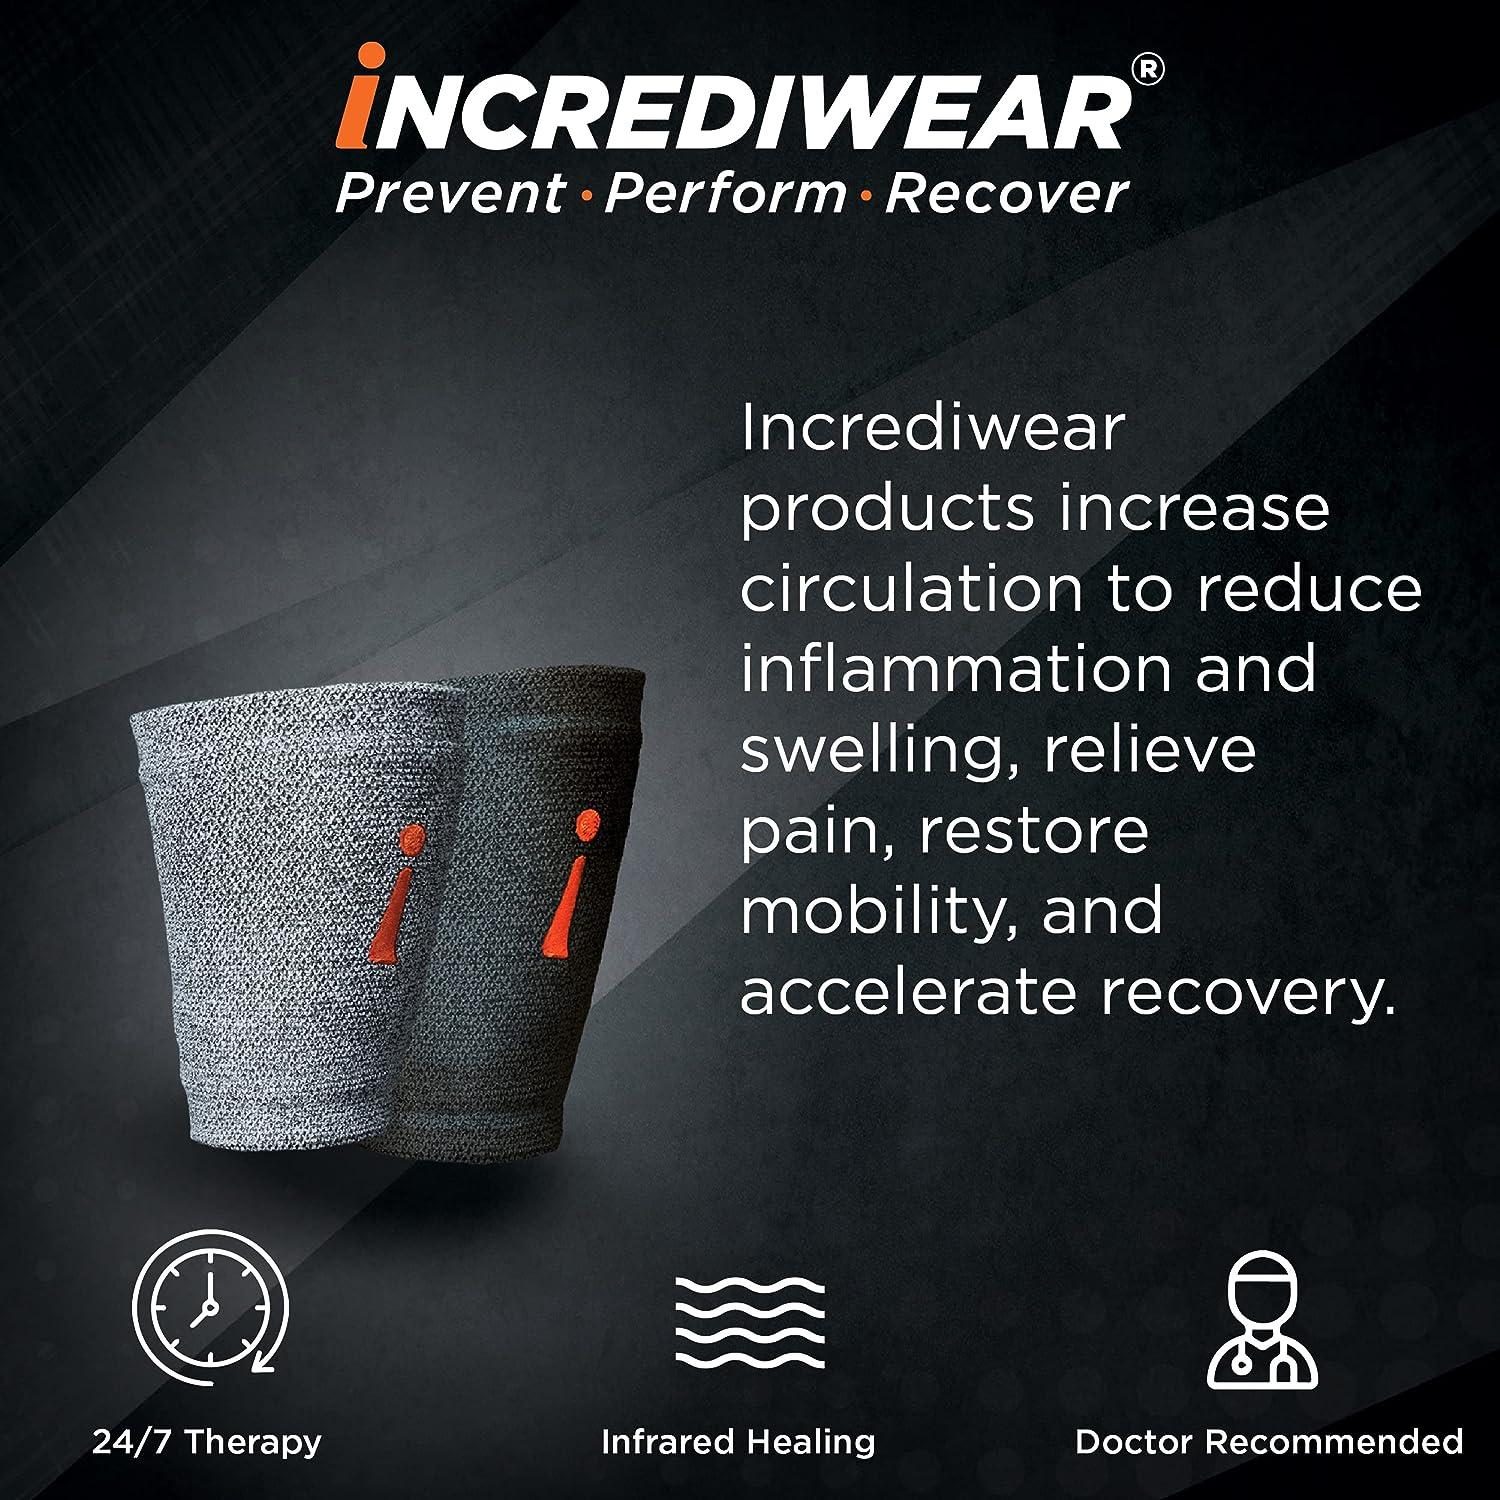 Incrediwear Knee Sleeve – Knee Braces for Knee Pain, Joint Pain Relief,  Swelling, Inflammation Relief, and Circulation, Knee Support for Women and  Men